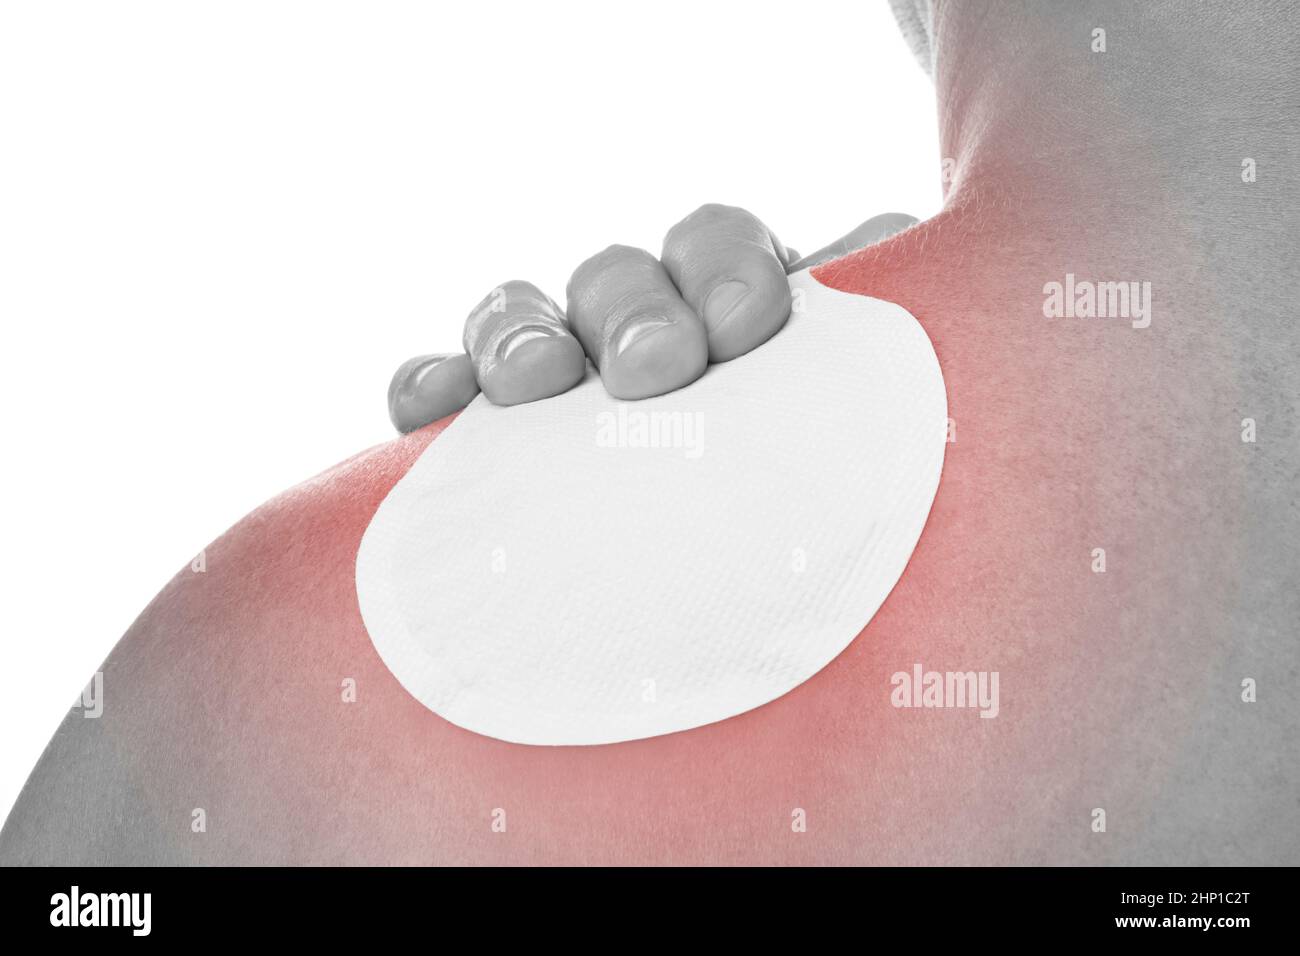 Painkiller patch - Stock Image - C011/6687 - Science Photo Library